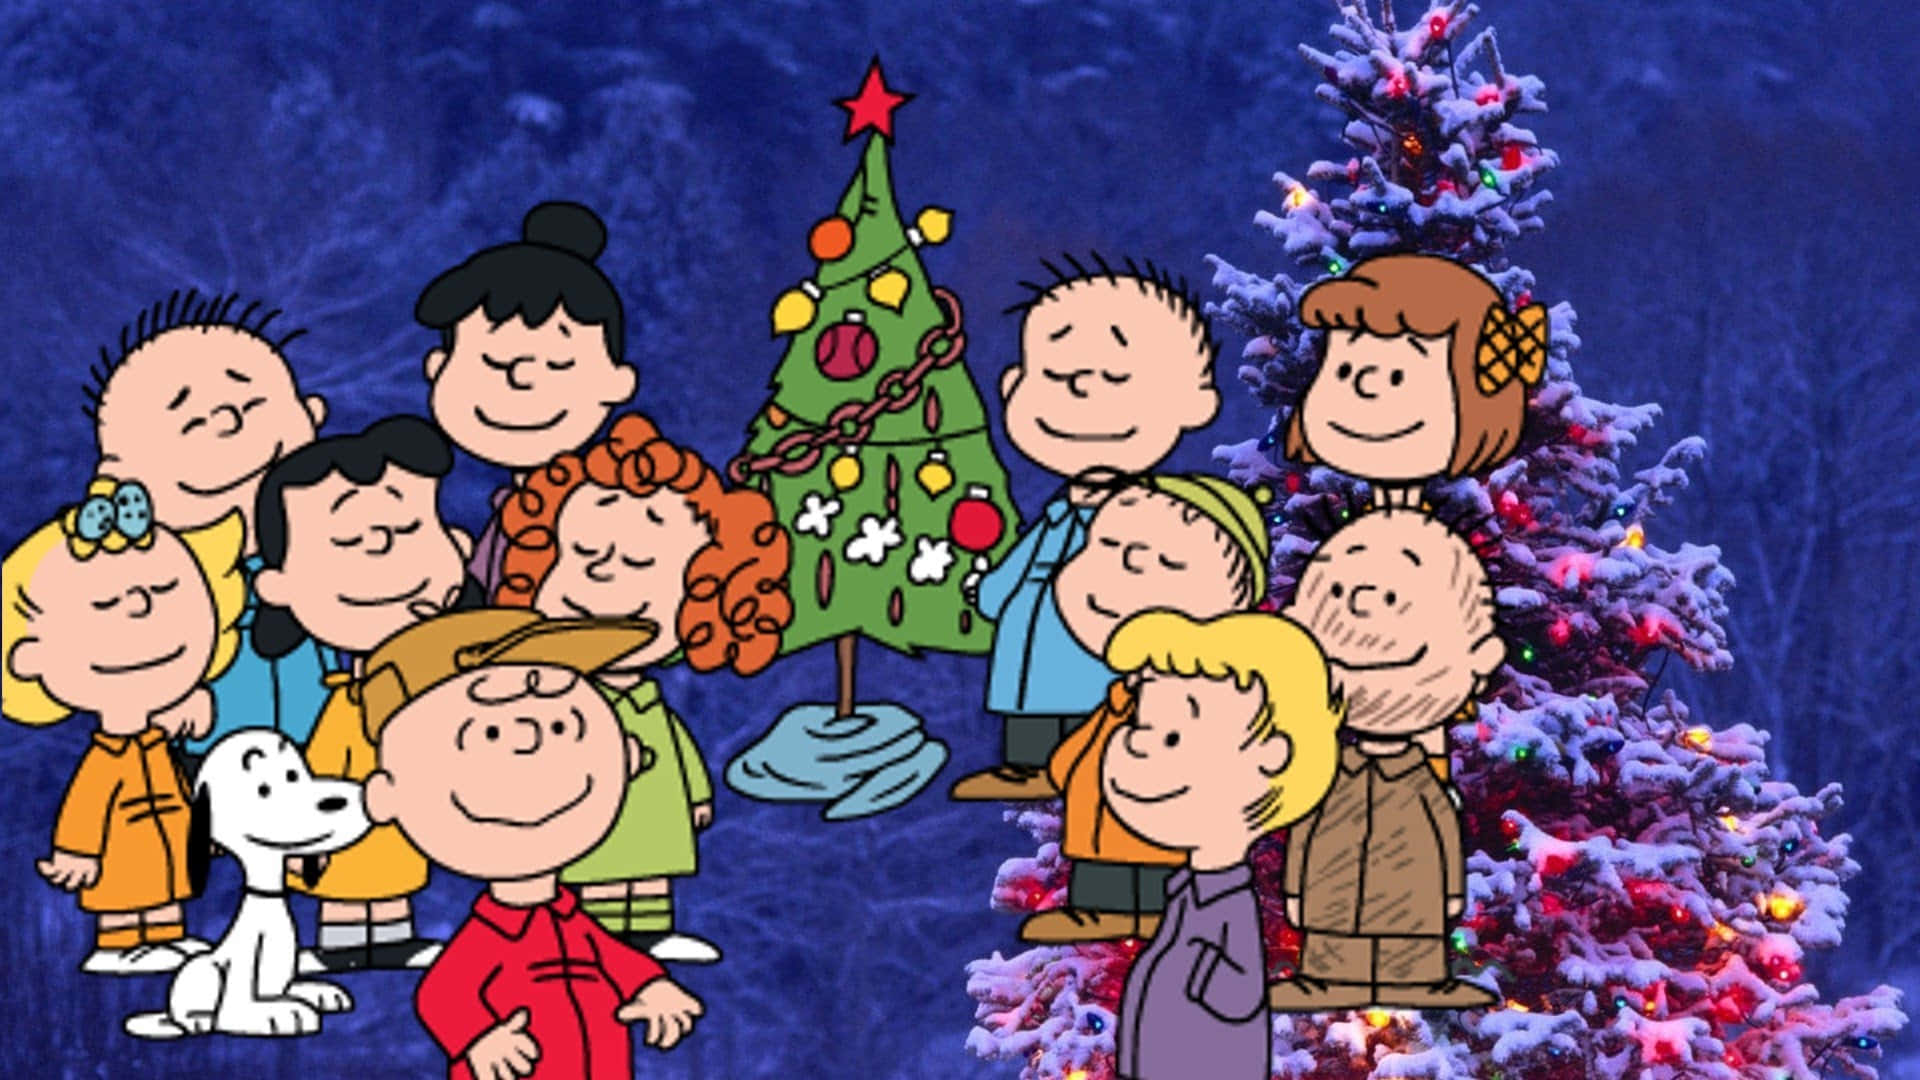 Charlie Brown and the gang enjoying a Christmas Eve complete with a tree and presents! Wallpaper